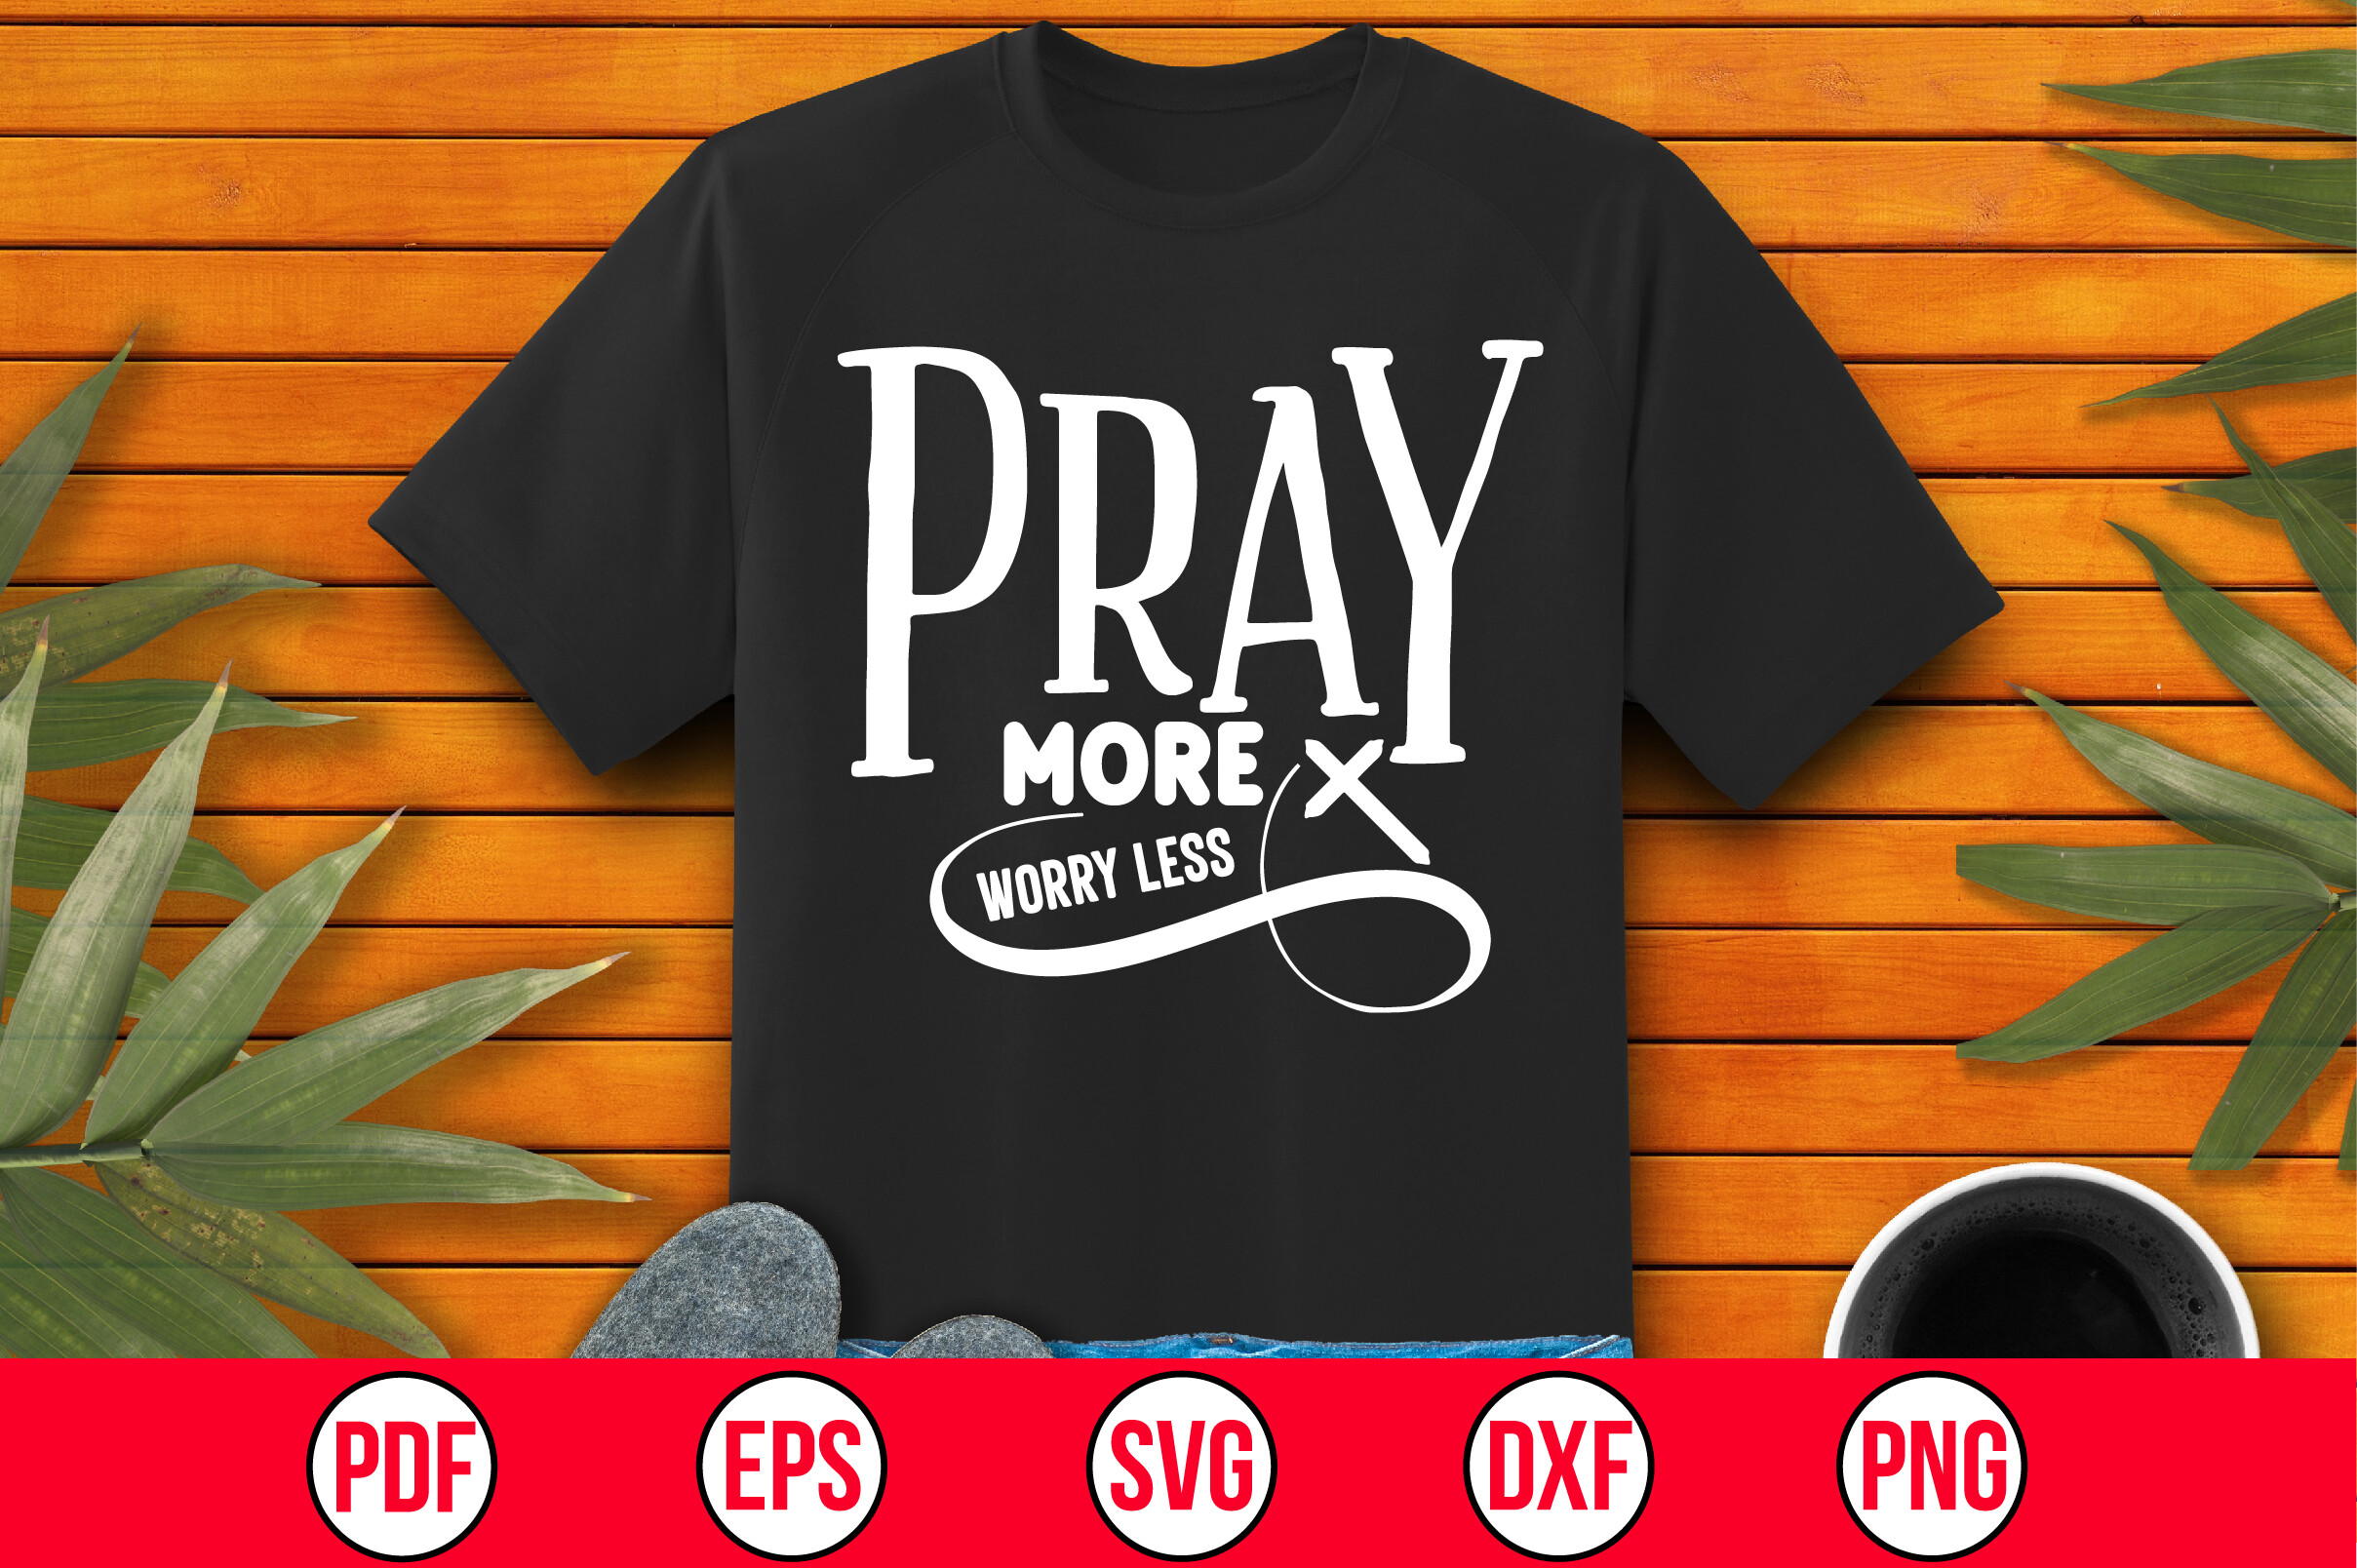 Pray More Worry Less SVG Graphic by Abdul Mannan125 · Creative Fabrica